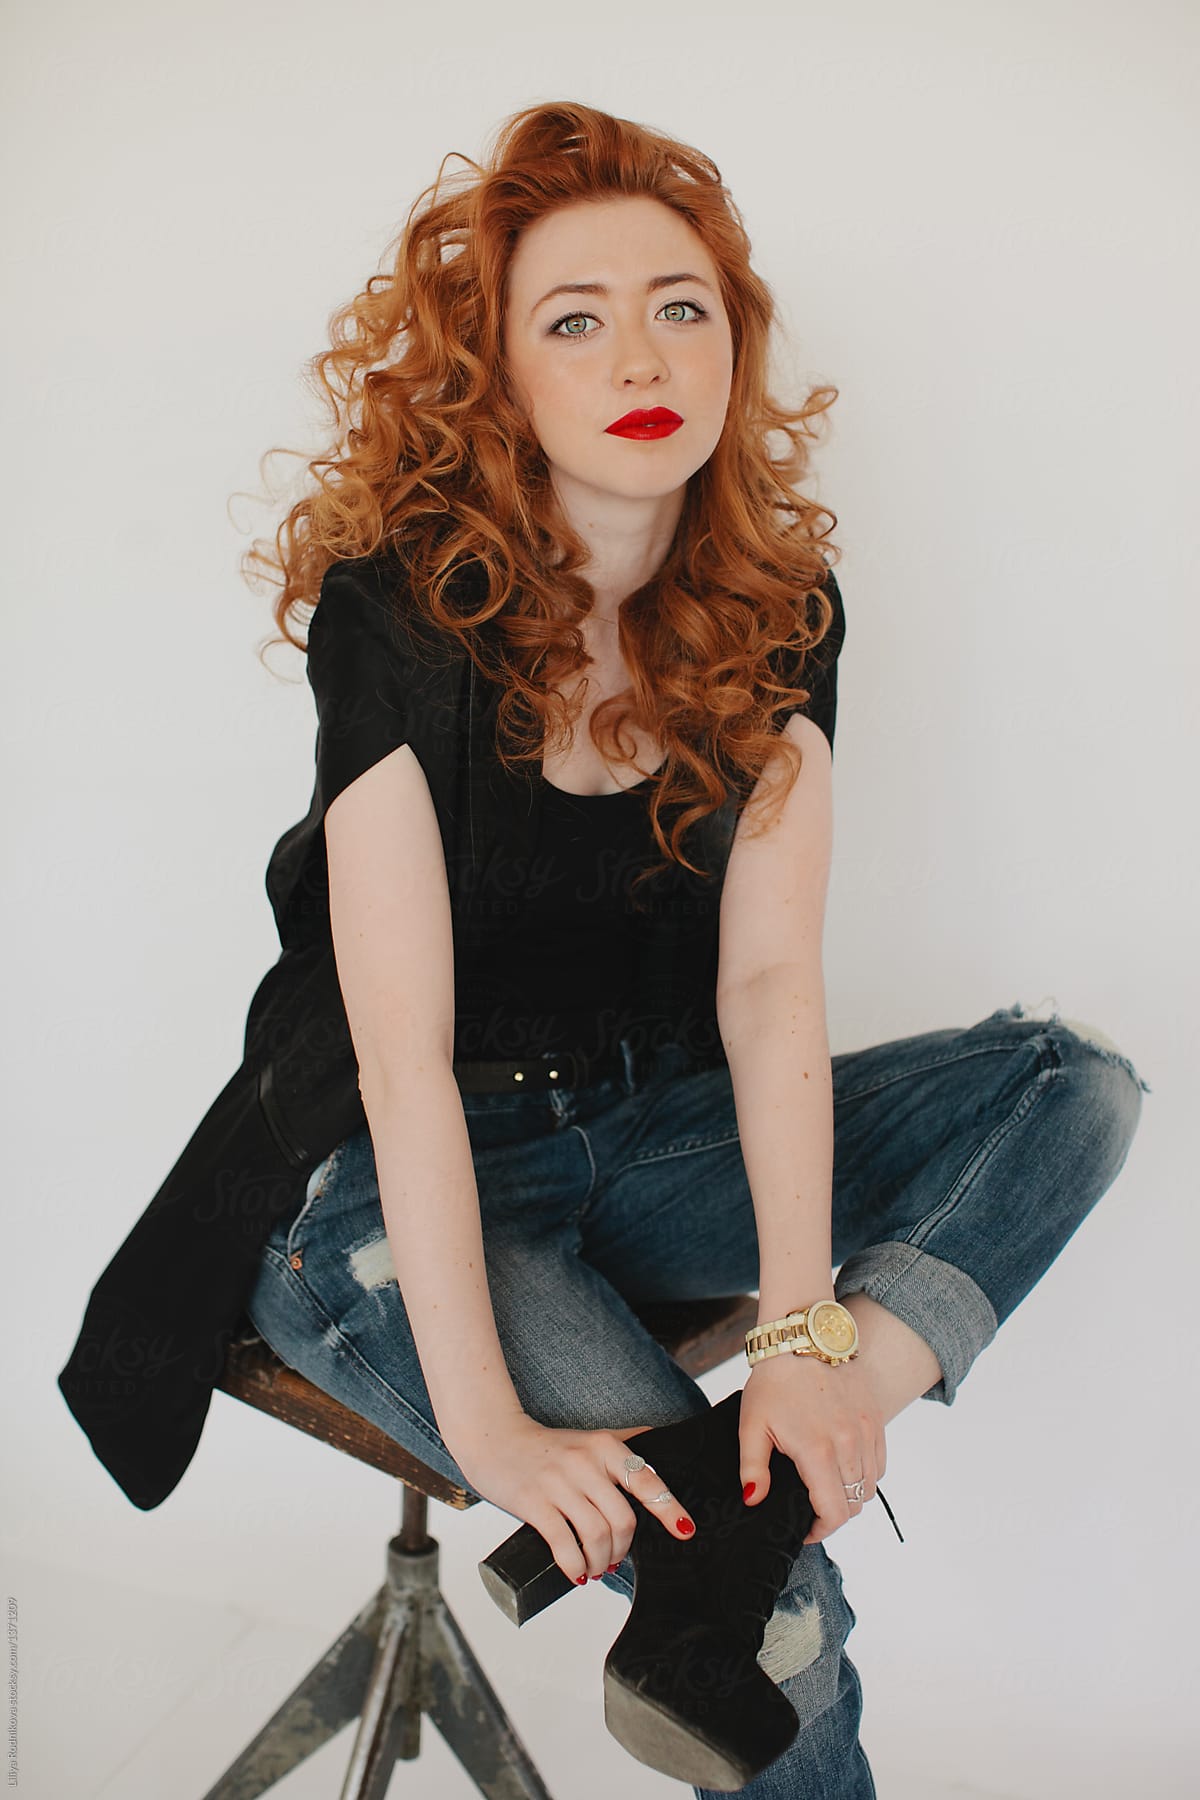 Portrait of young fashionable woman with red curly hair posing at studio